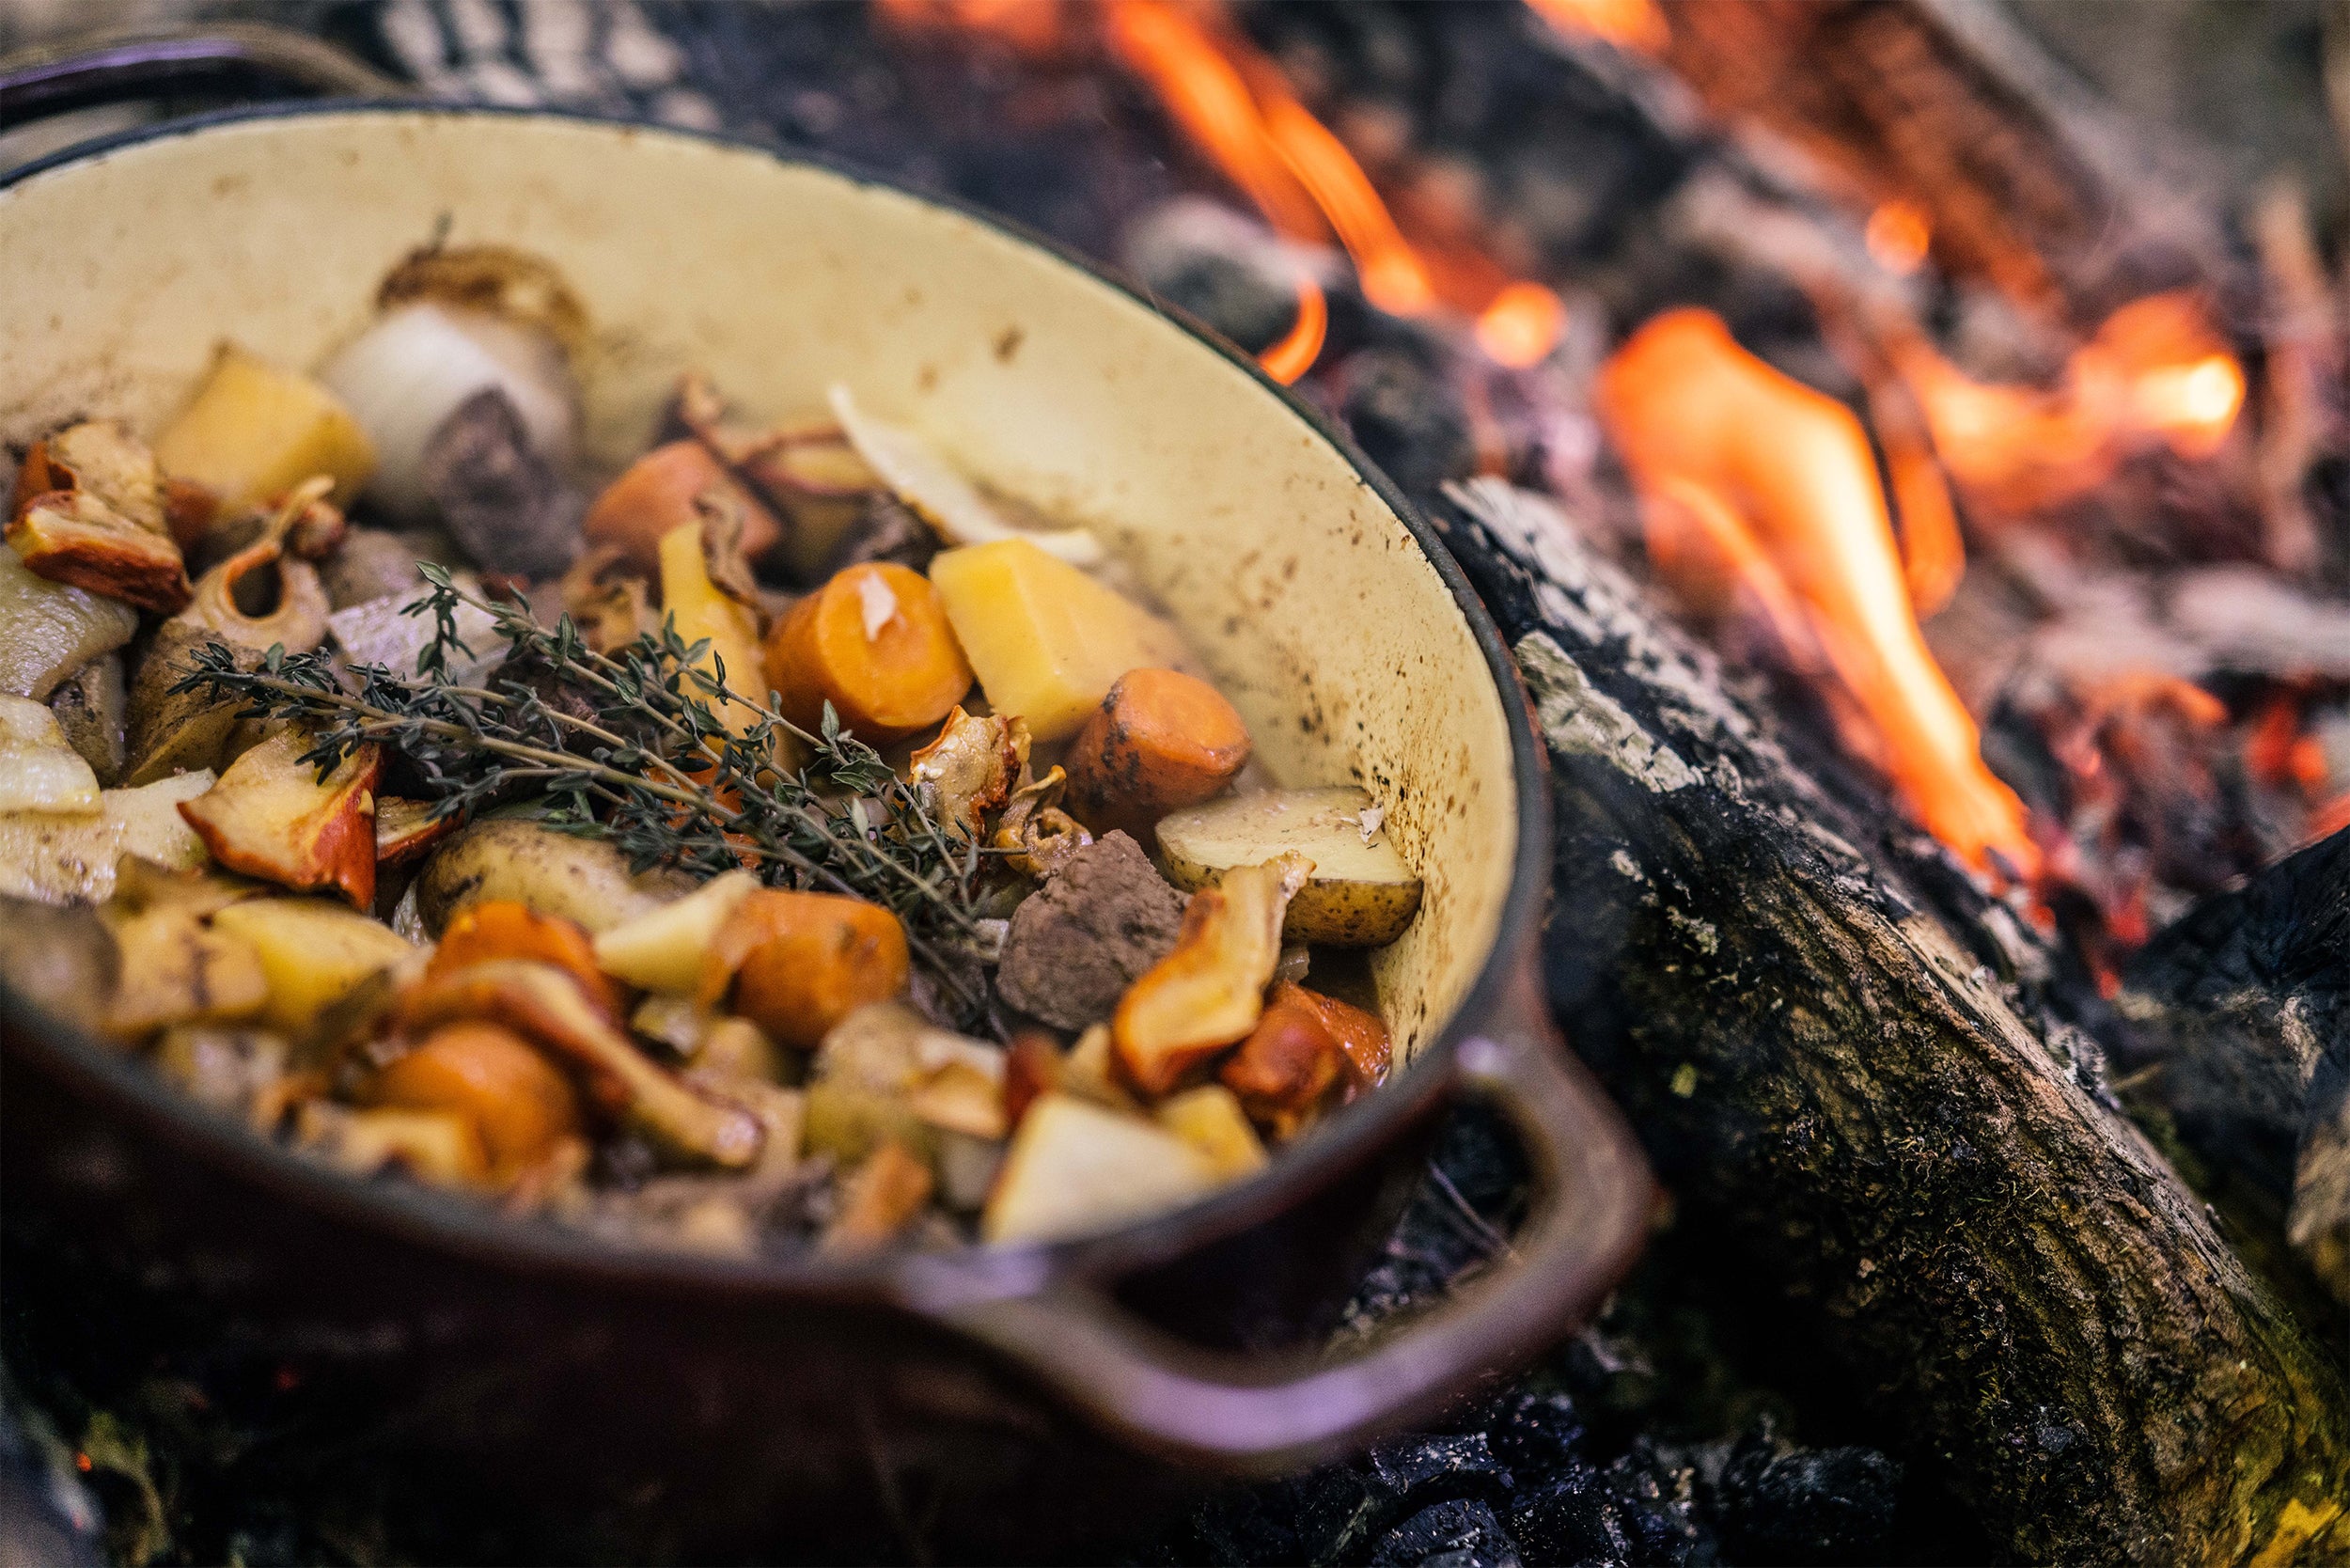 Braised Moose & Chanterelle Stew from Paul Templeton